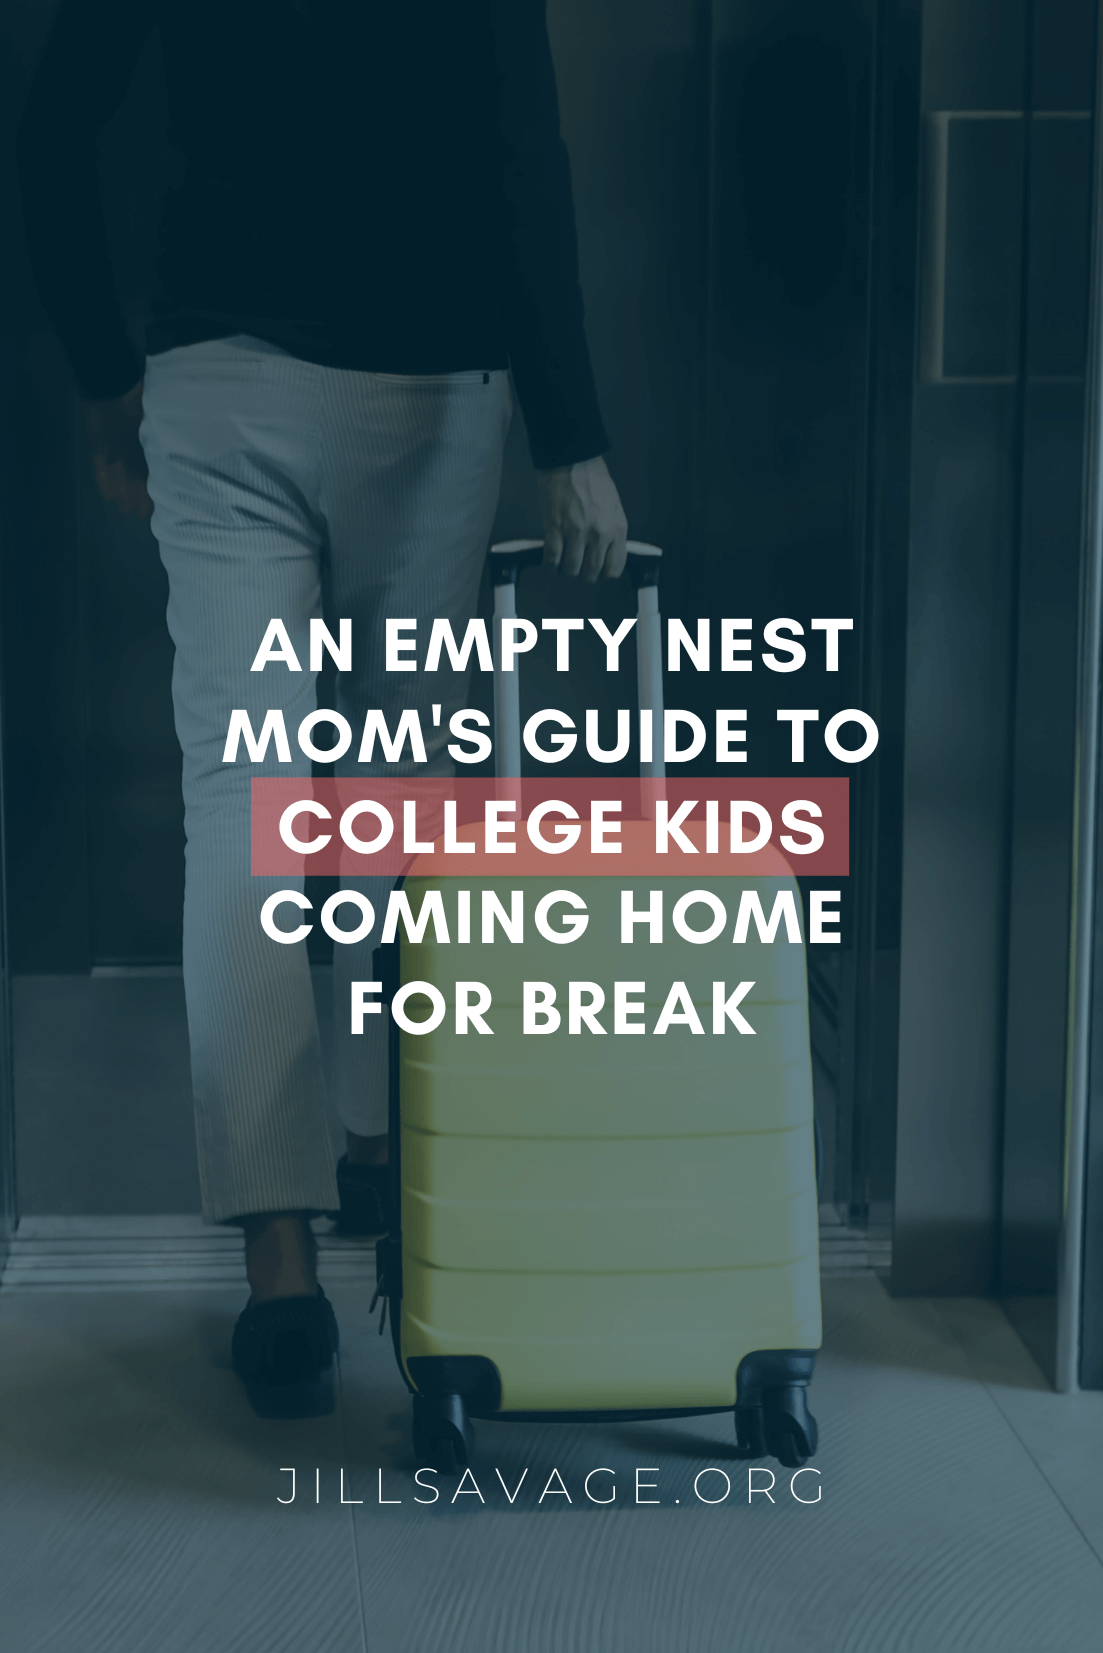 An Empty Nest Mom’s Guide to College Kids Coming Home For Break